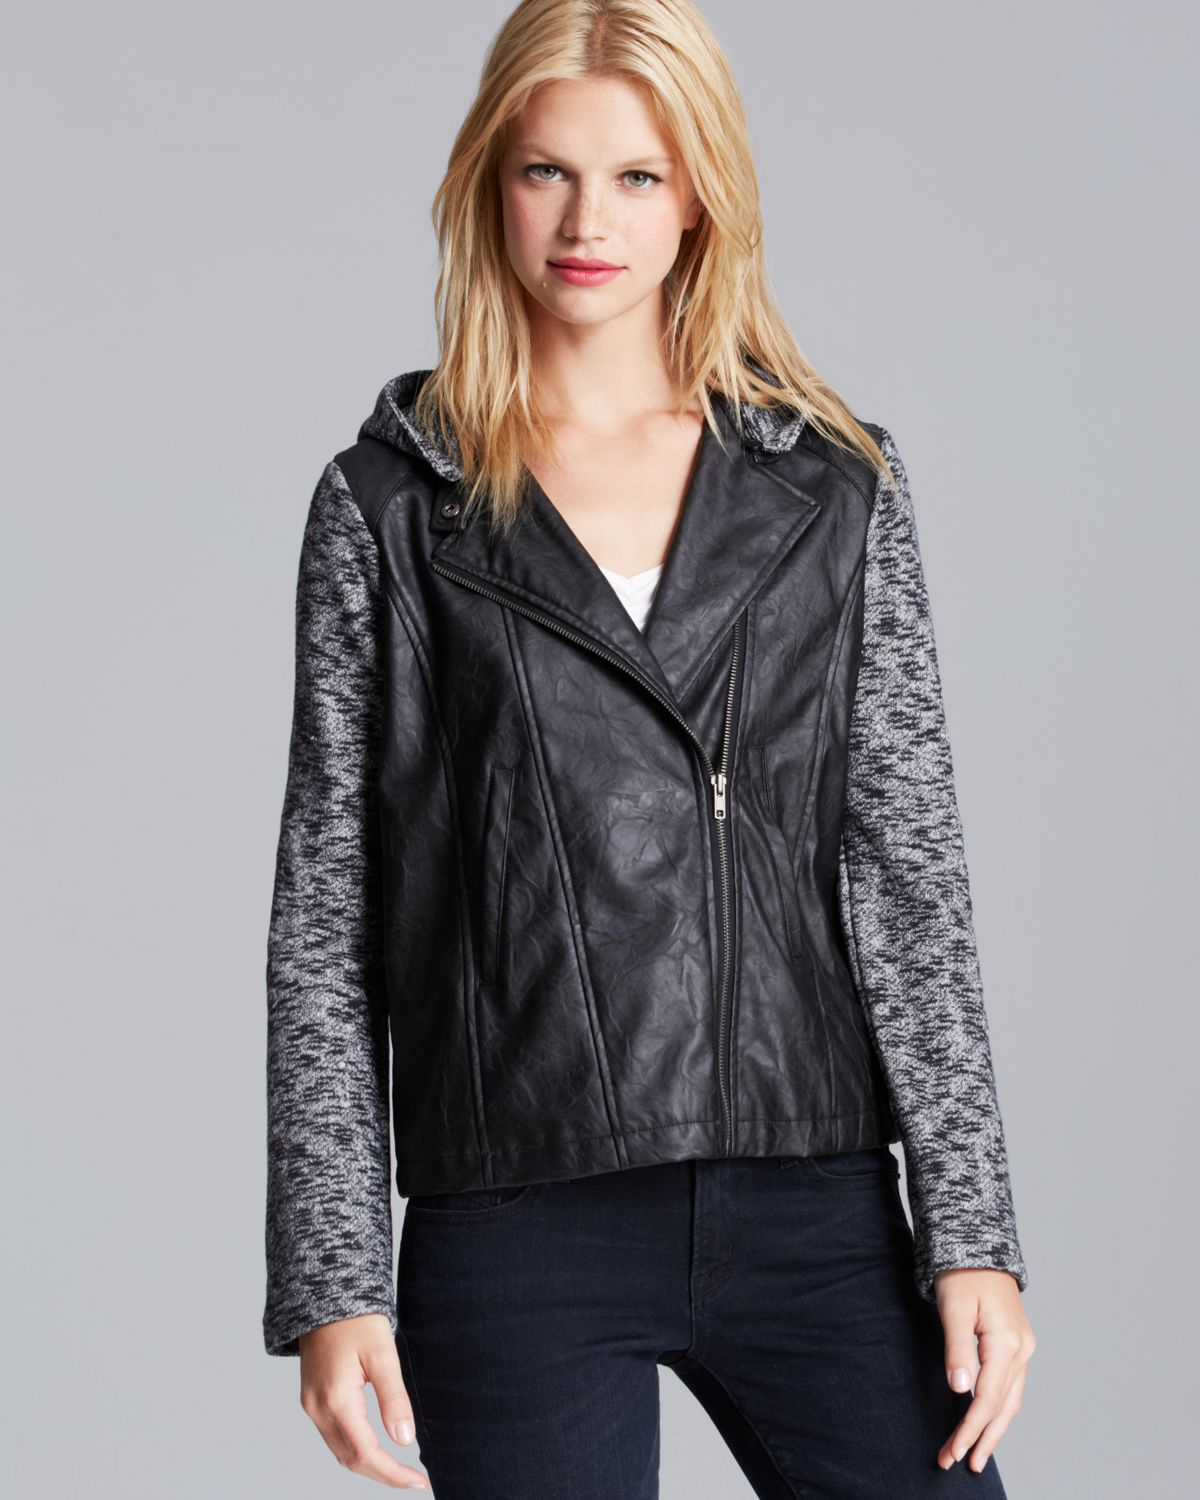 Jack Bb Dakota Jacket - Faux Leather & French Terry Hooded in Black | Lyst